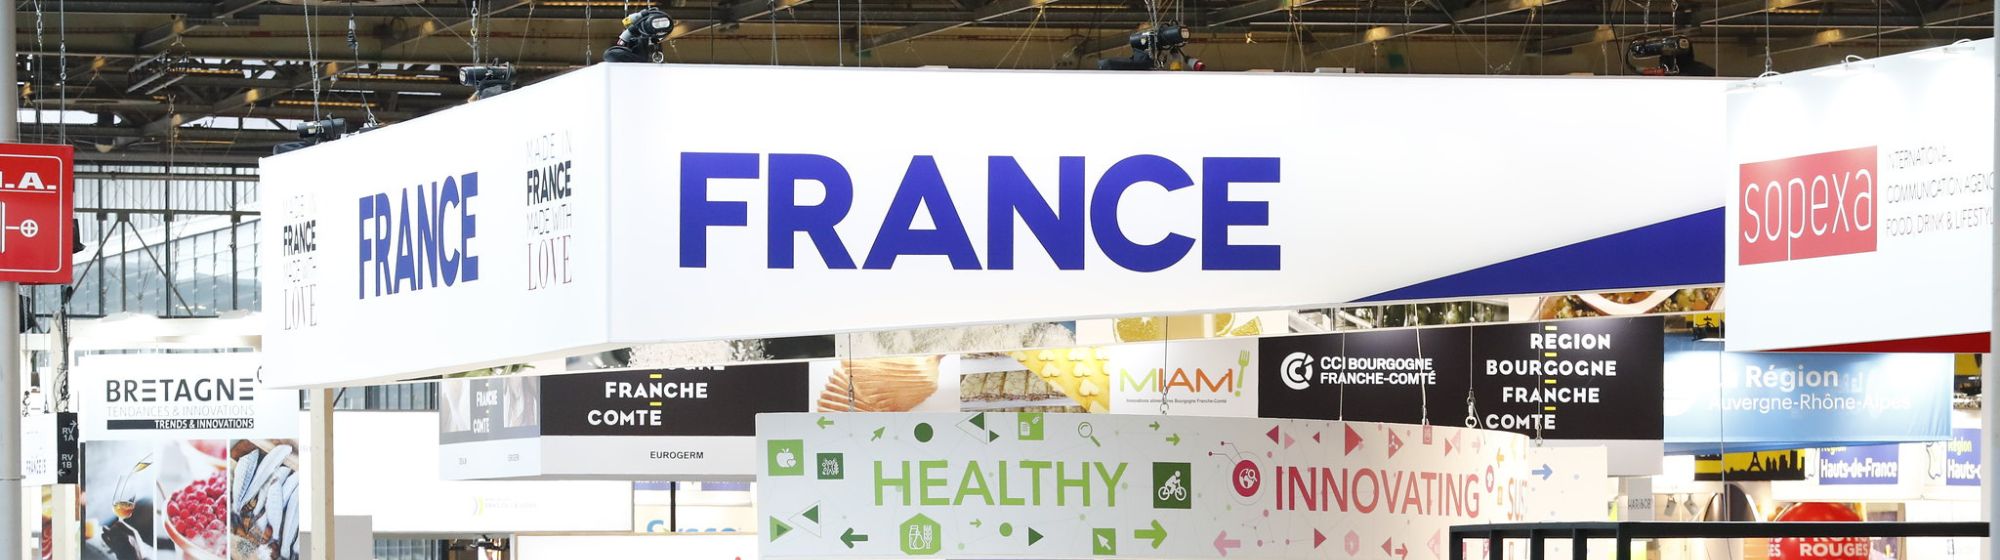 France's booth on SIAL Paris